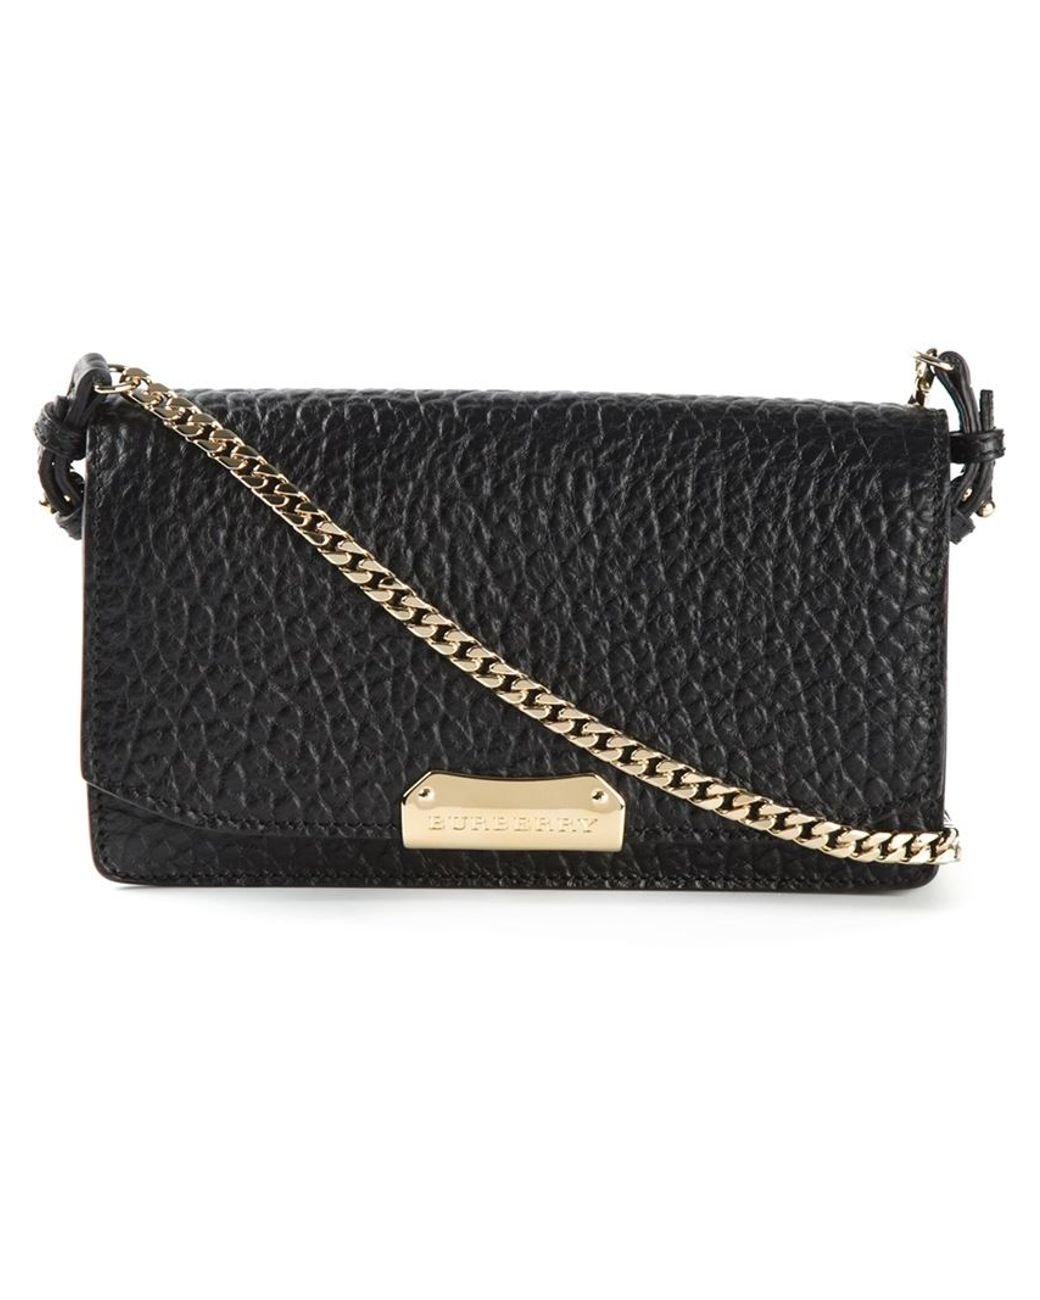 Burberry Pebbled-Leather Cross-Body Bag in Black | Lyst